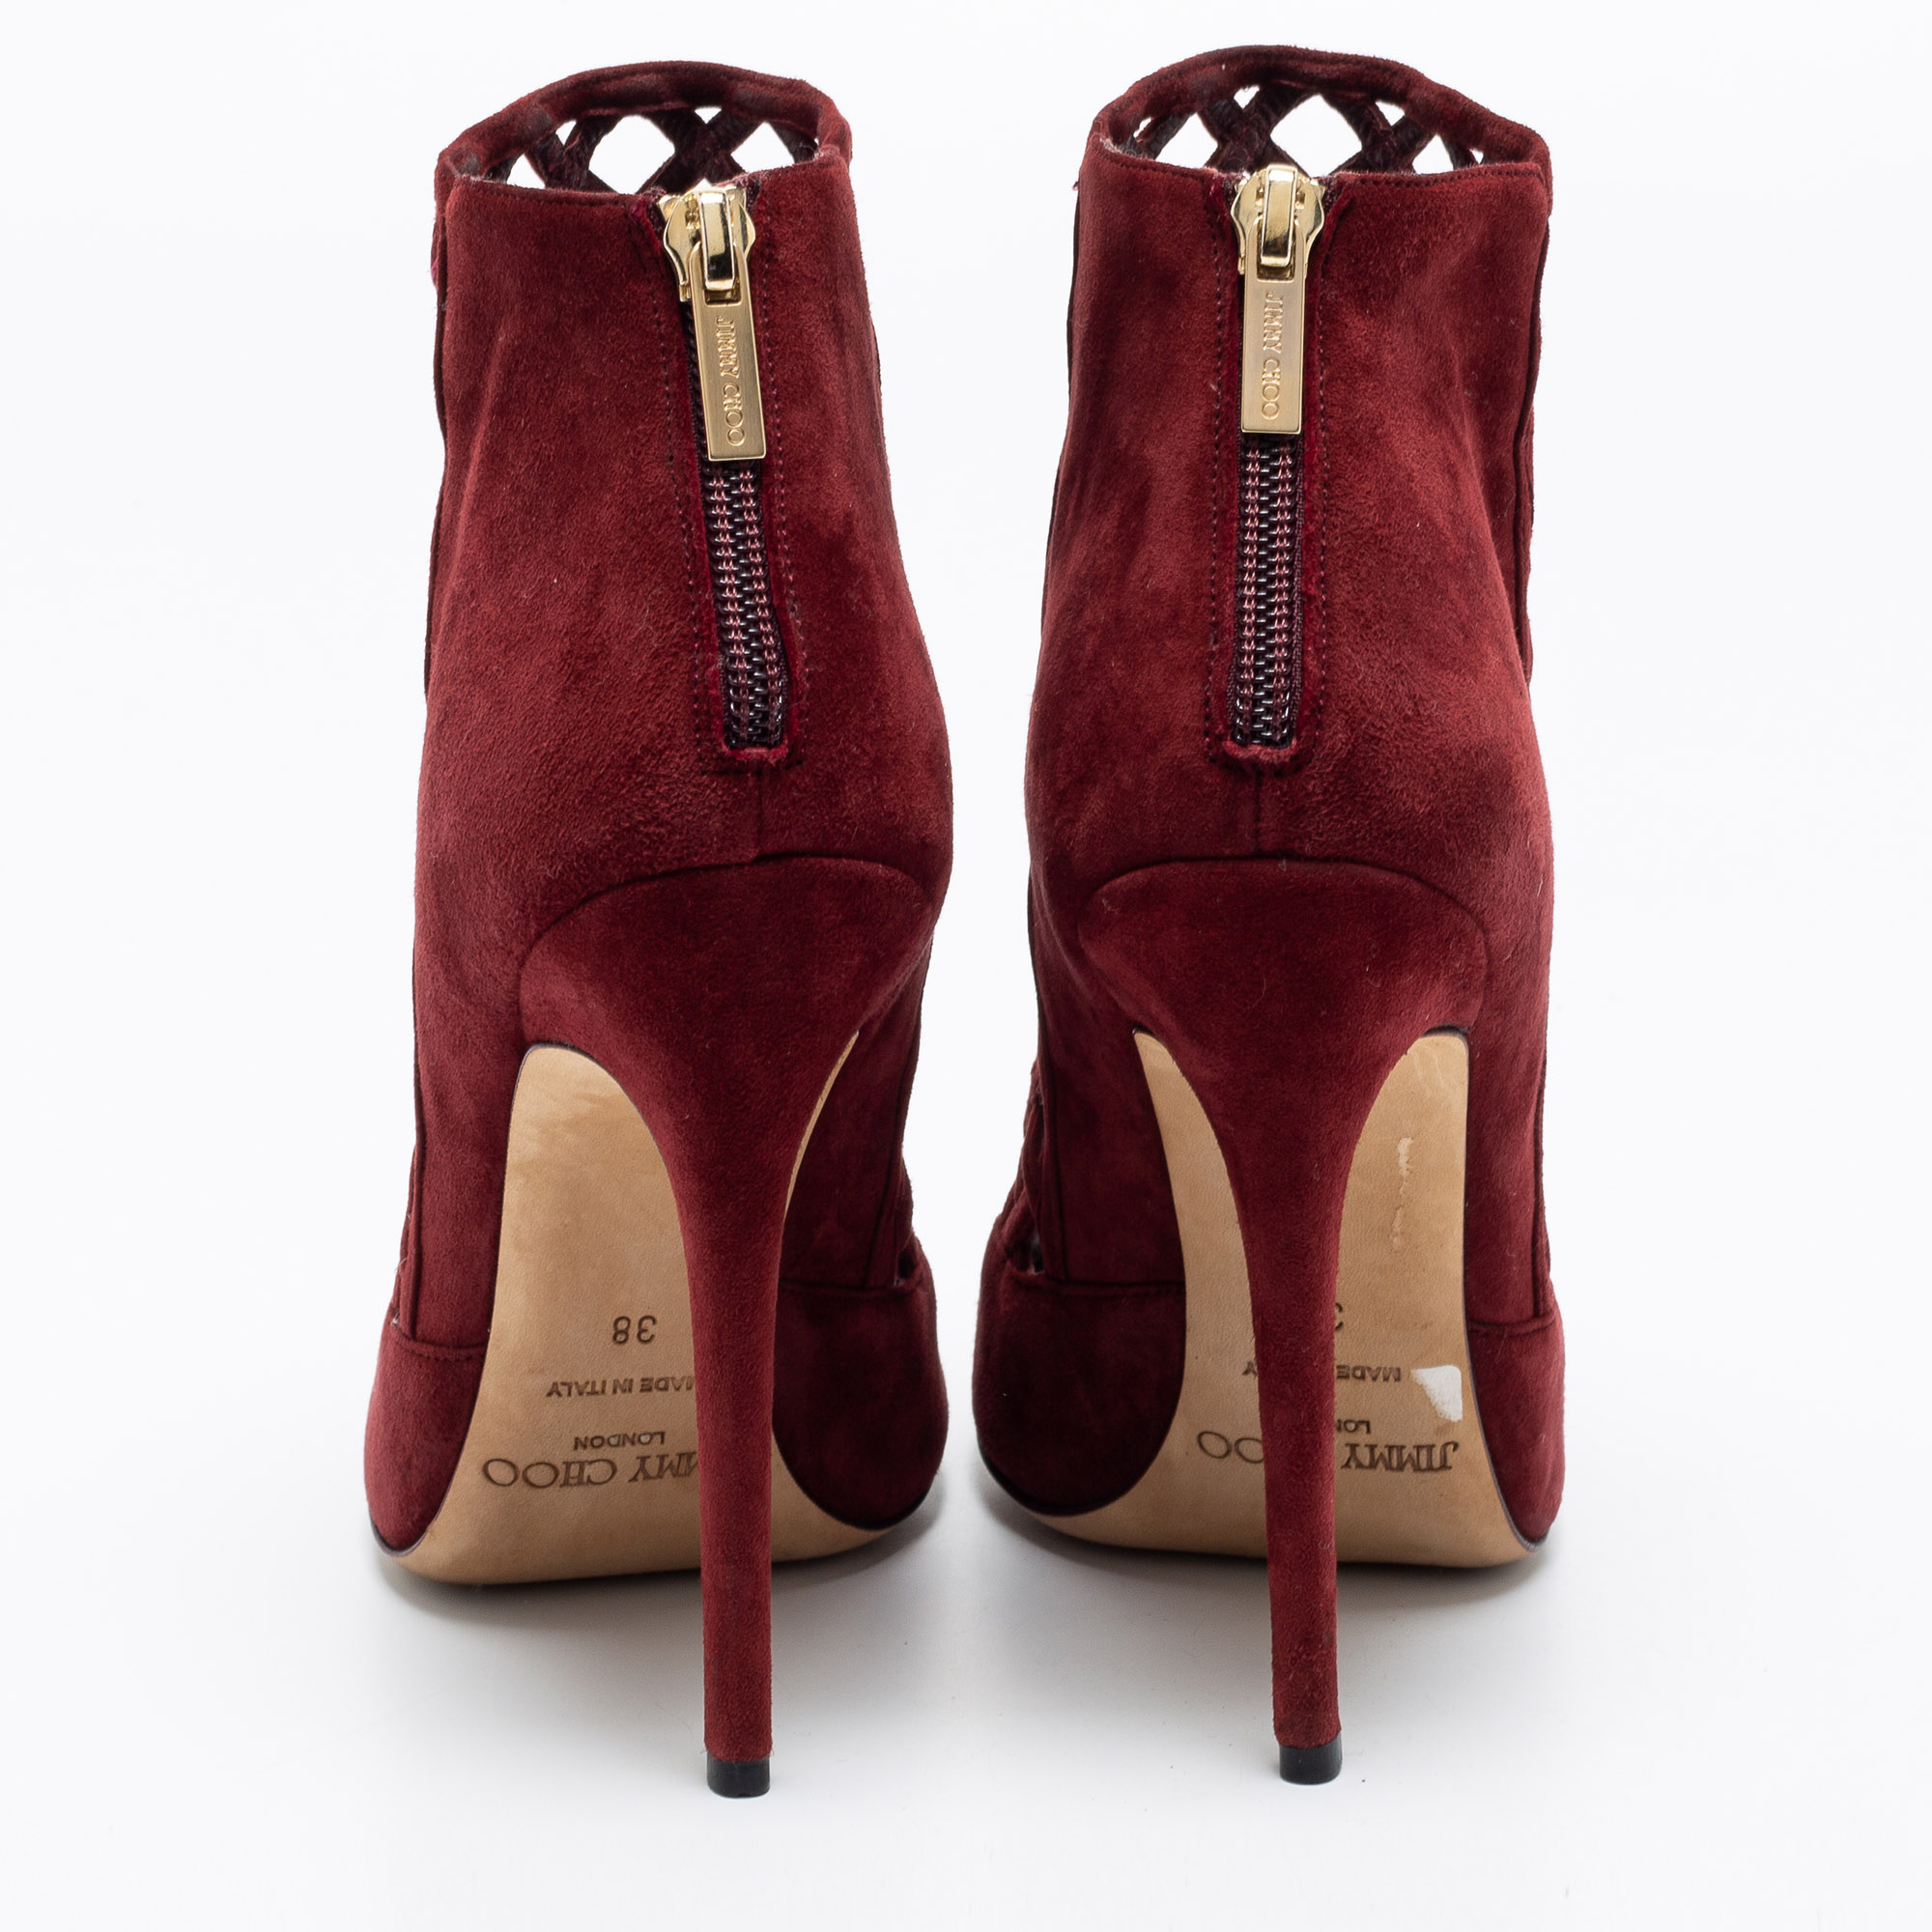 Jimmy Choo Burgundy Suede Drift Cut-Out Peep-Toe Ankle Booties Size 38